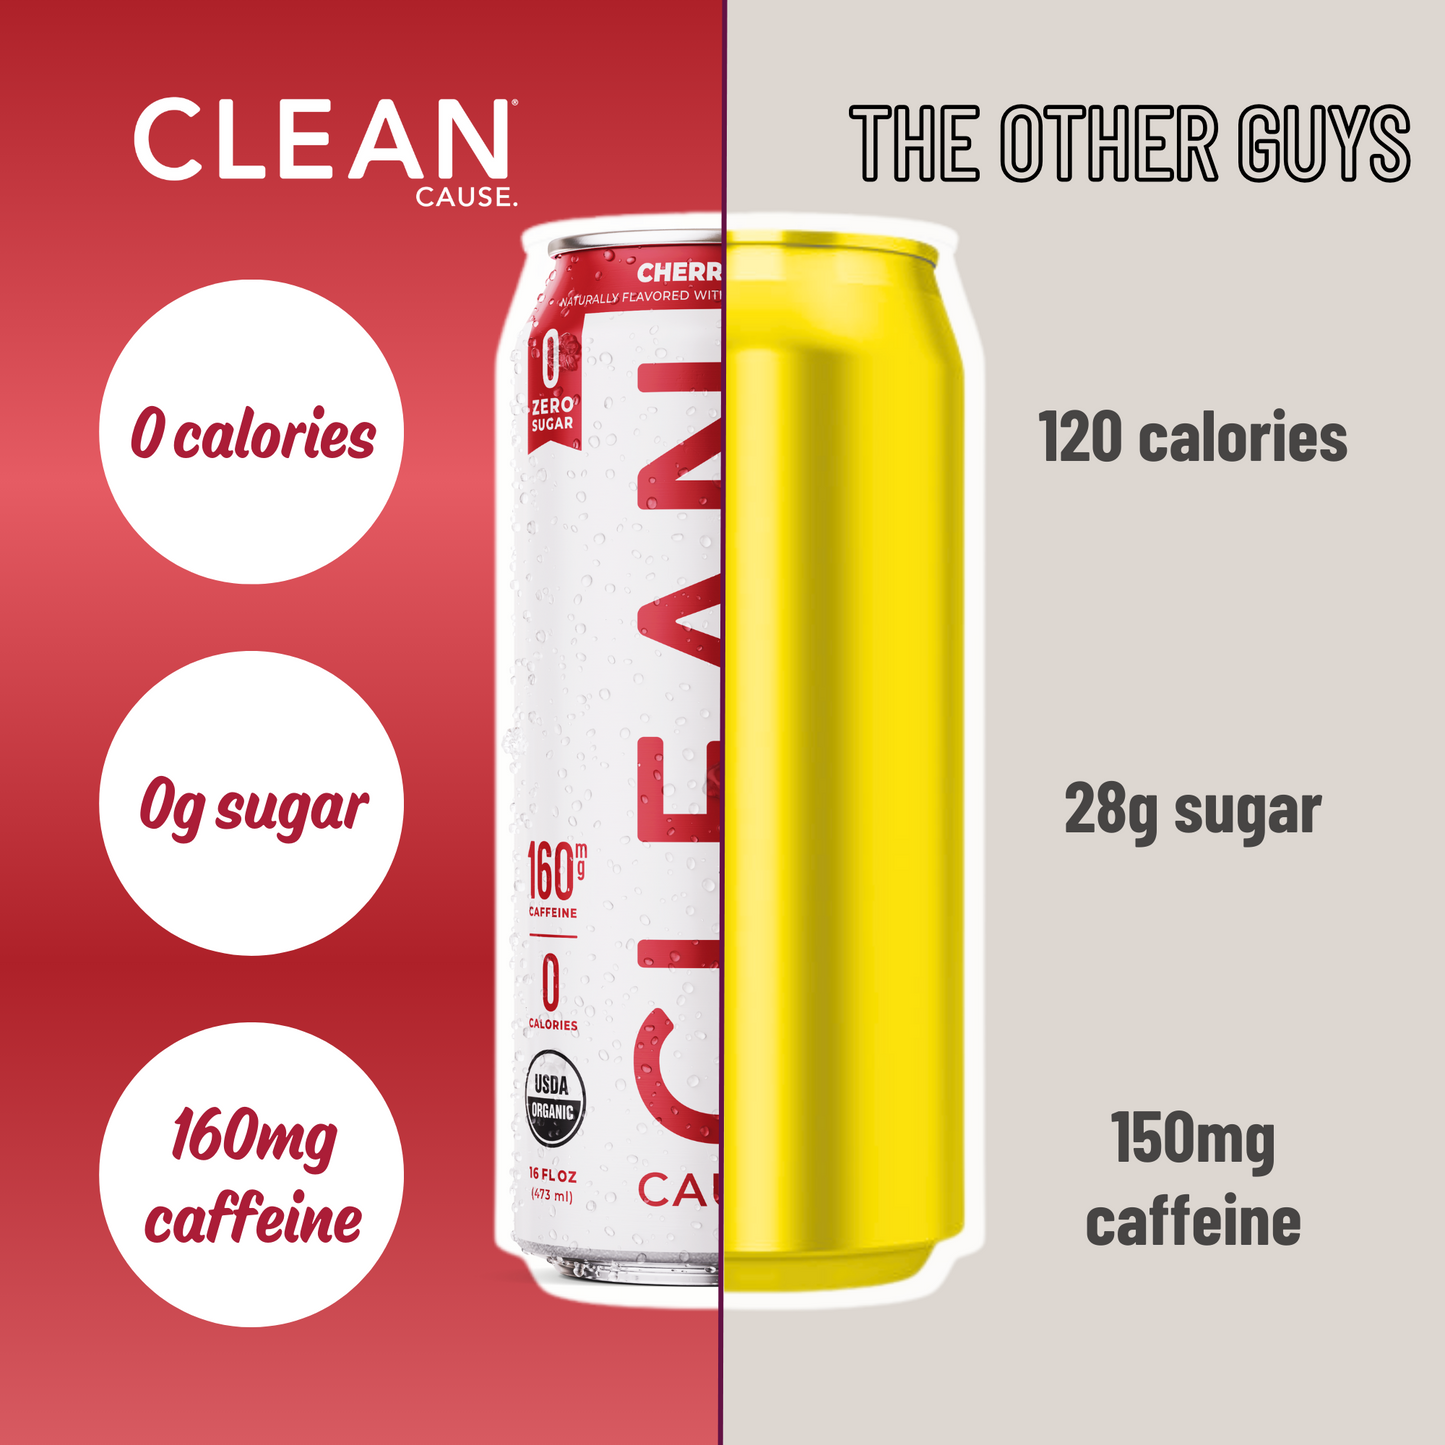 A can split between CLEAN Cherry Lime Yerba Mate and "The Other Guys" showing CLEAN with 0 calories, 0g sugar, and 160mg caffeine and the other guys with 120 calories, 28g sugar, and 150mg caffeine